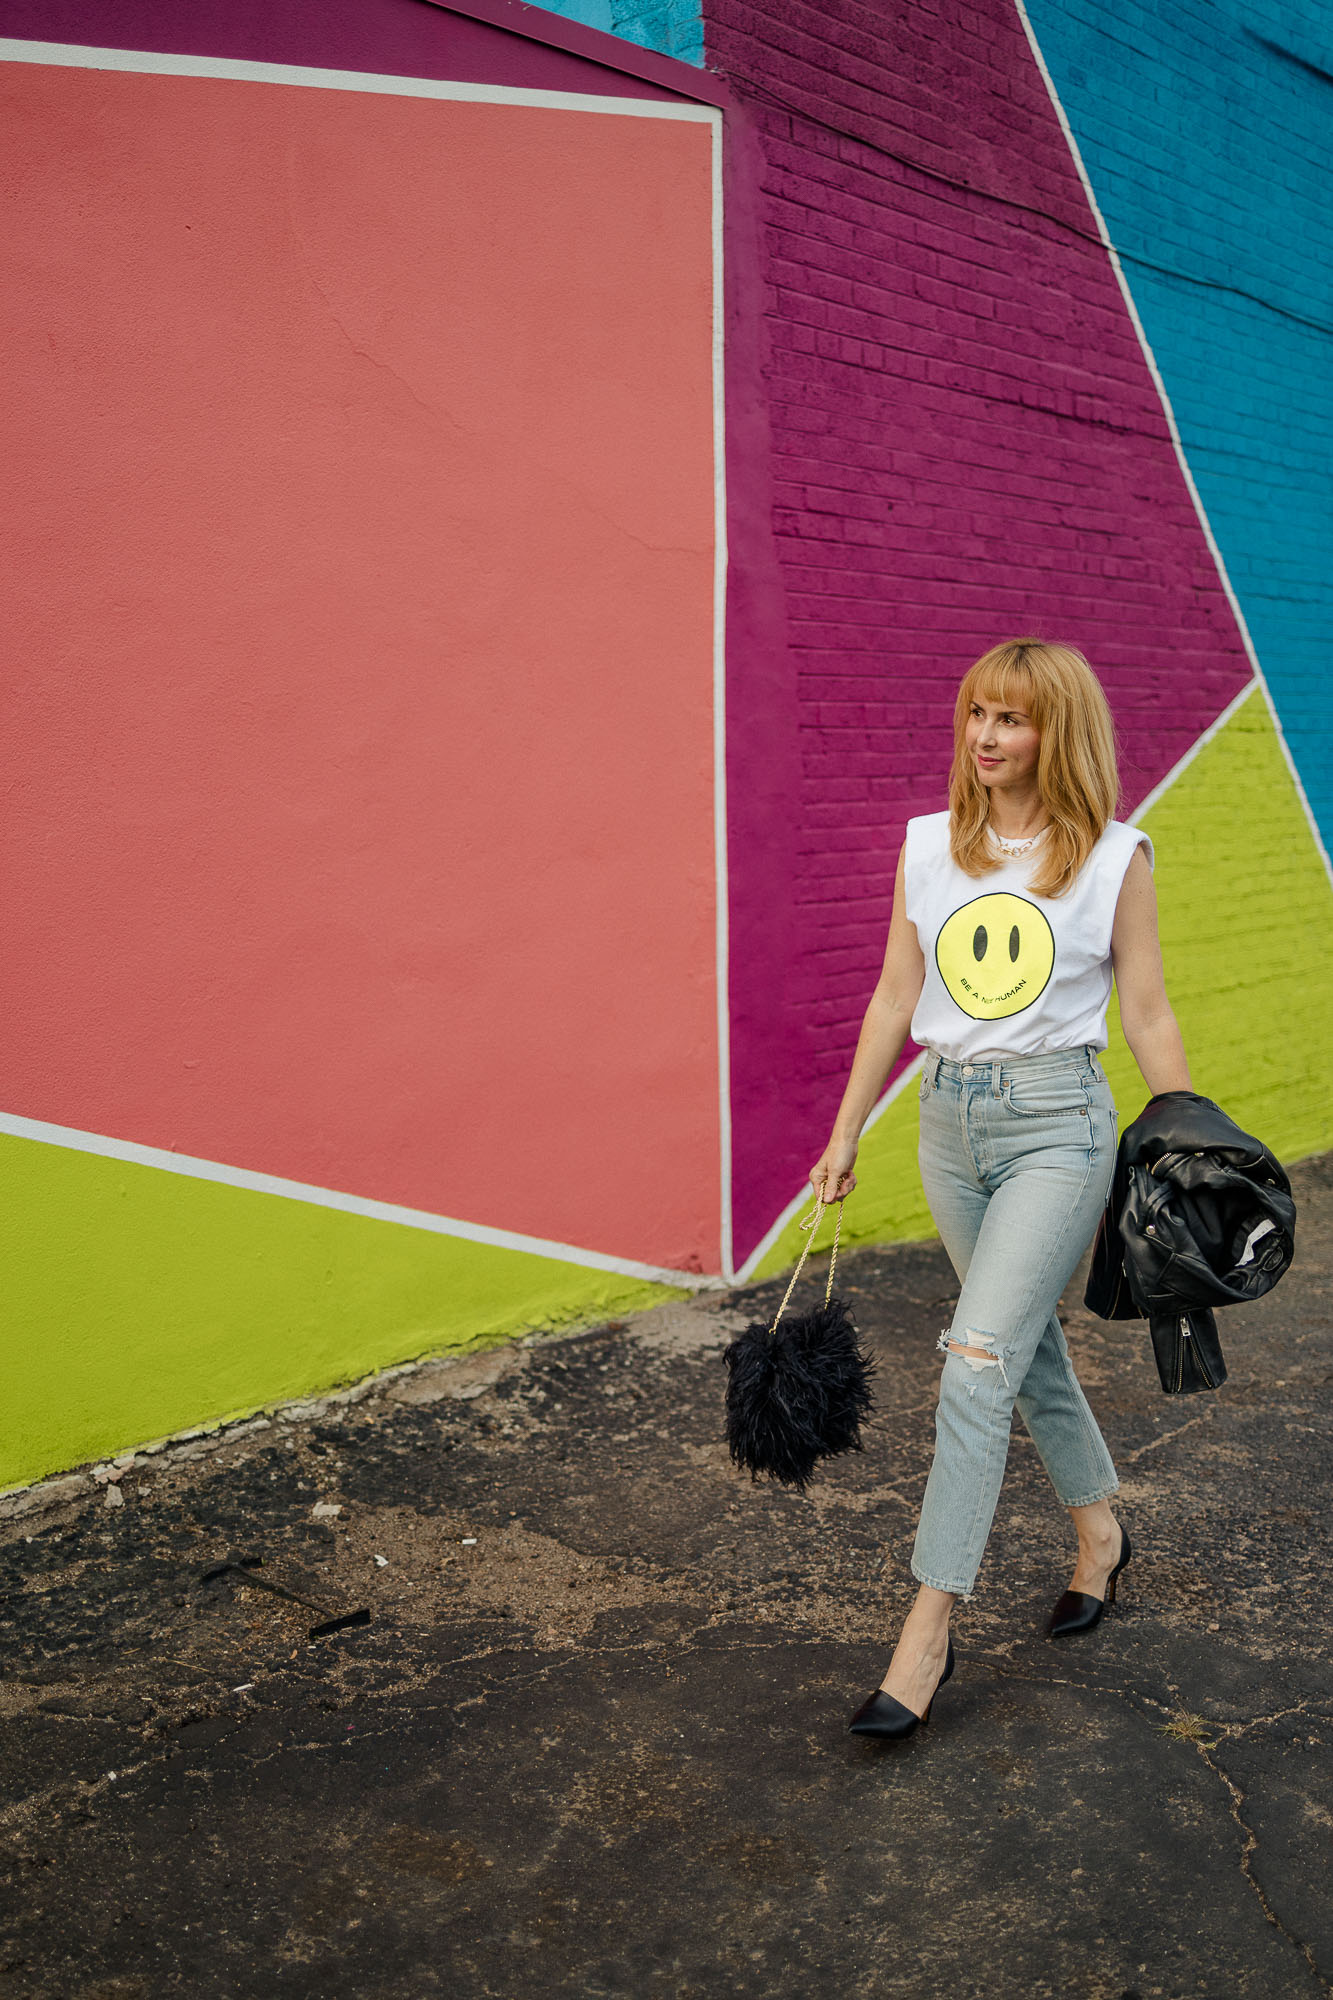 Walking by an 80s mural in the le superbe smiley face graphic tee with shoulder pads.